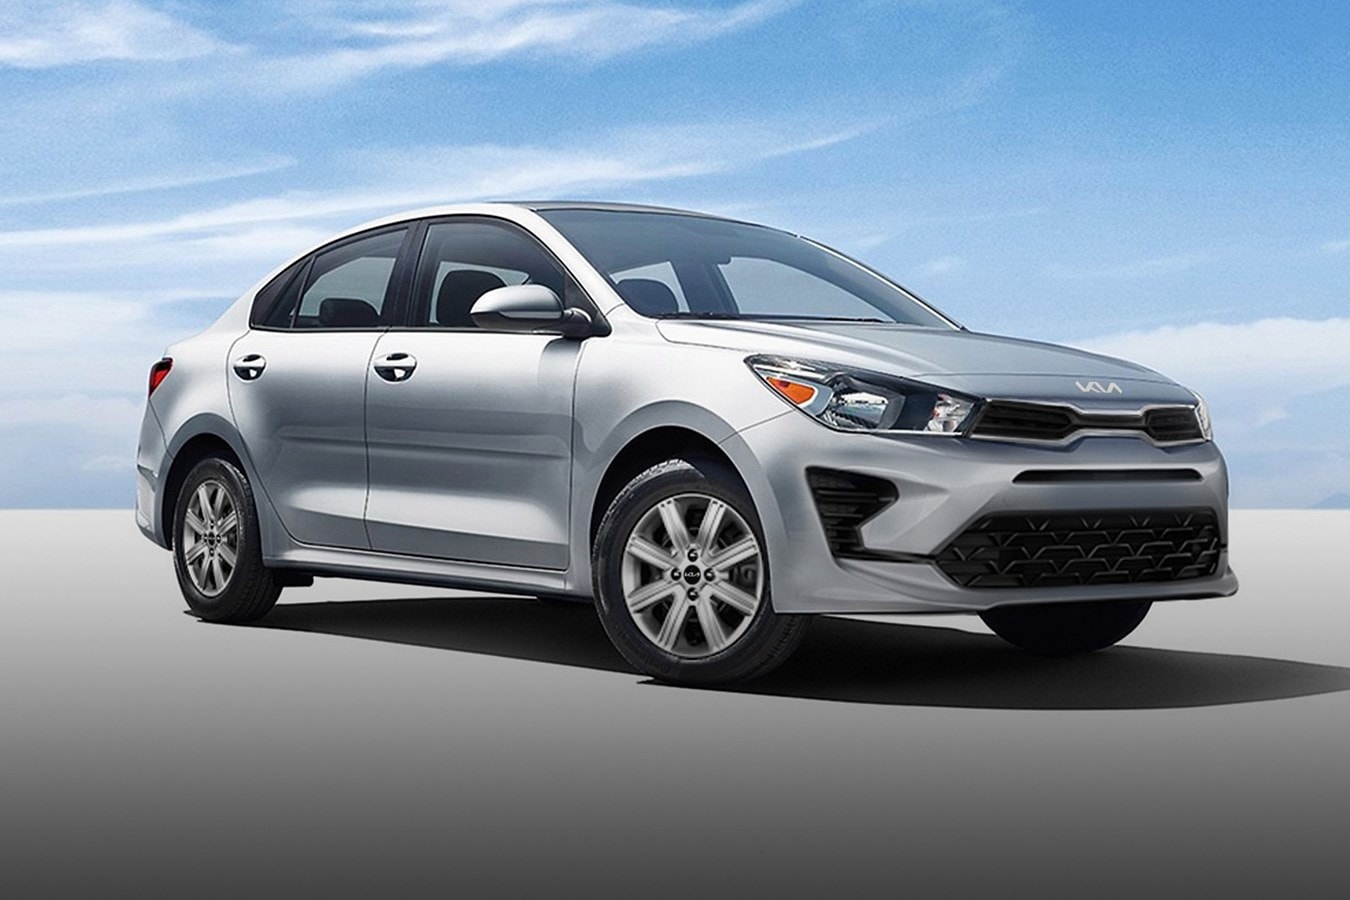 2022 Kia Rio Is One of the Most Affordable New Cars on Sale Stateside